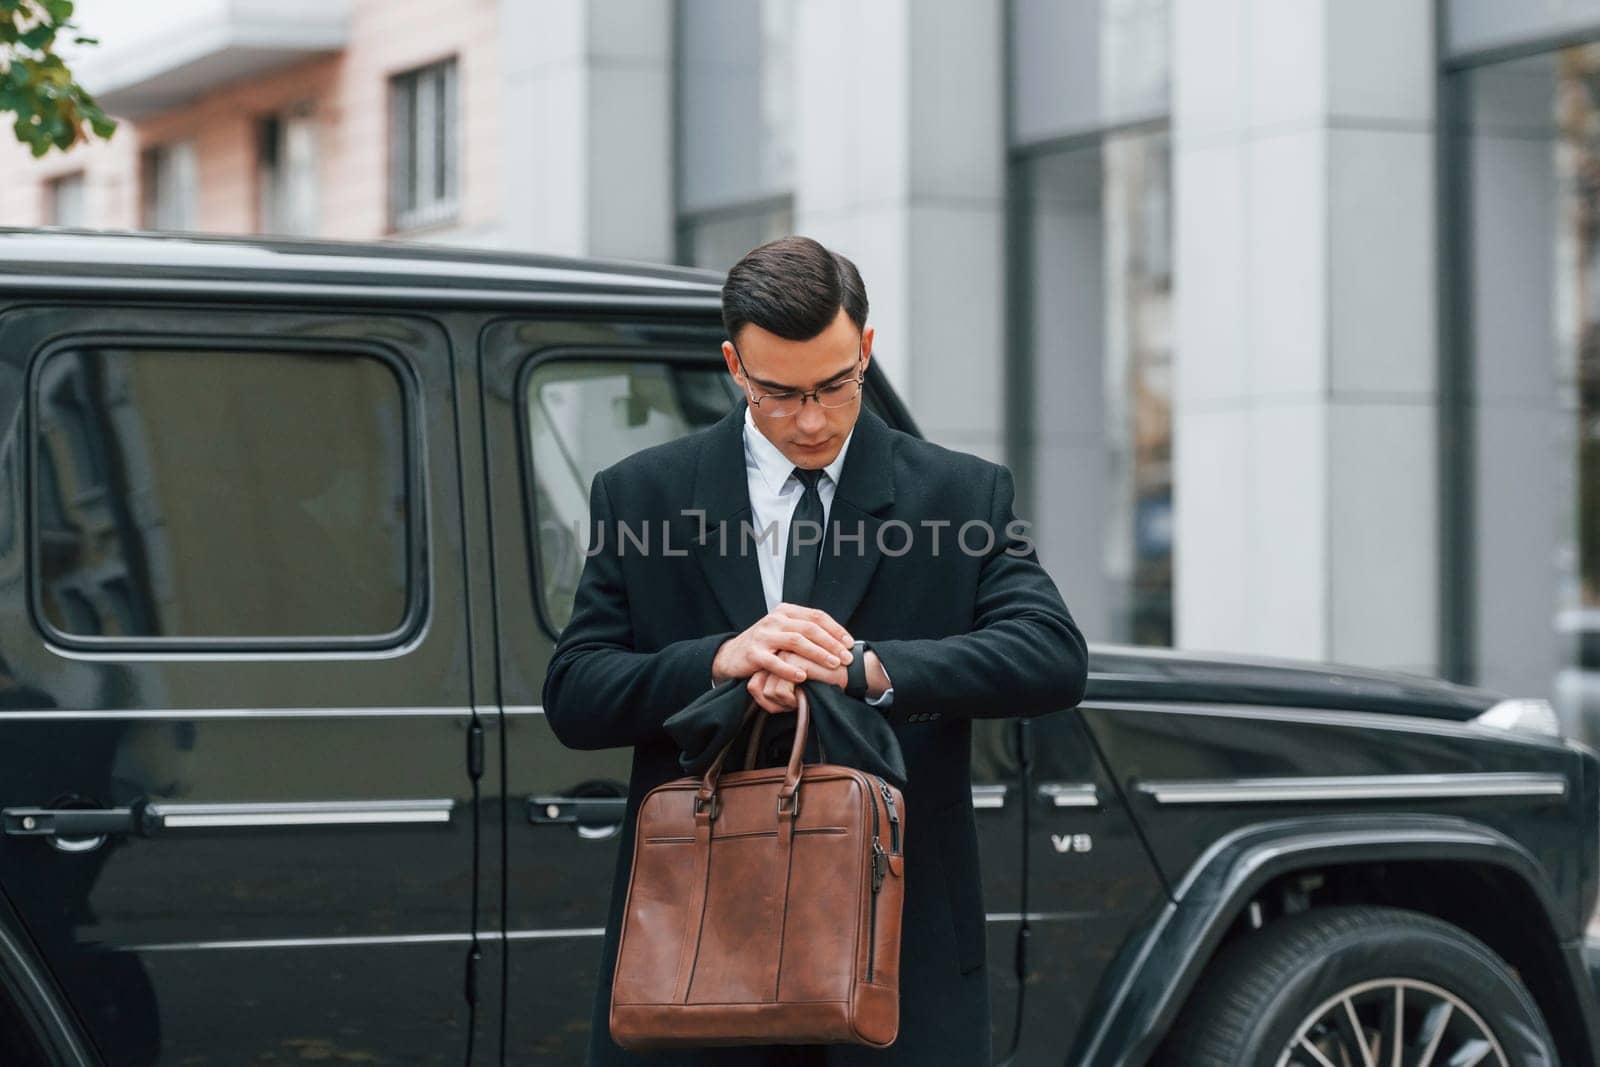 Holding brown bag in hands. Businessman in black suit and tie is outdoors in the city by Standret